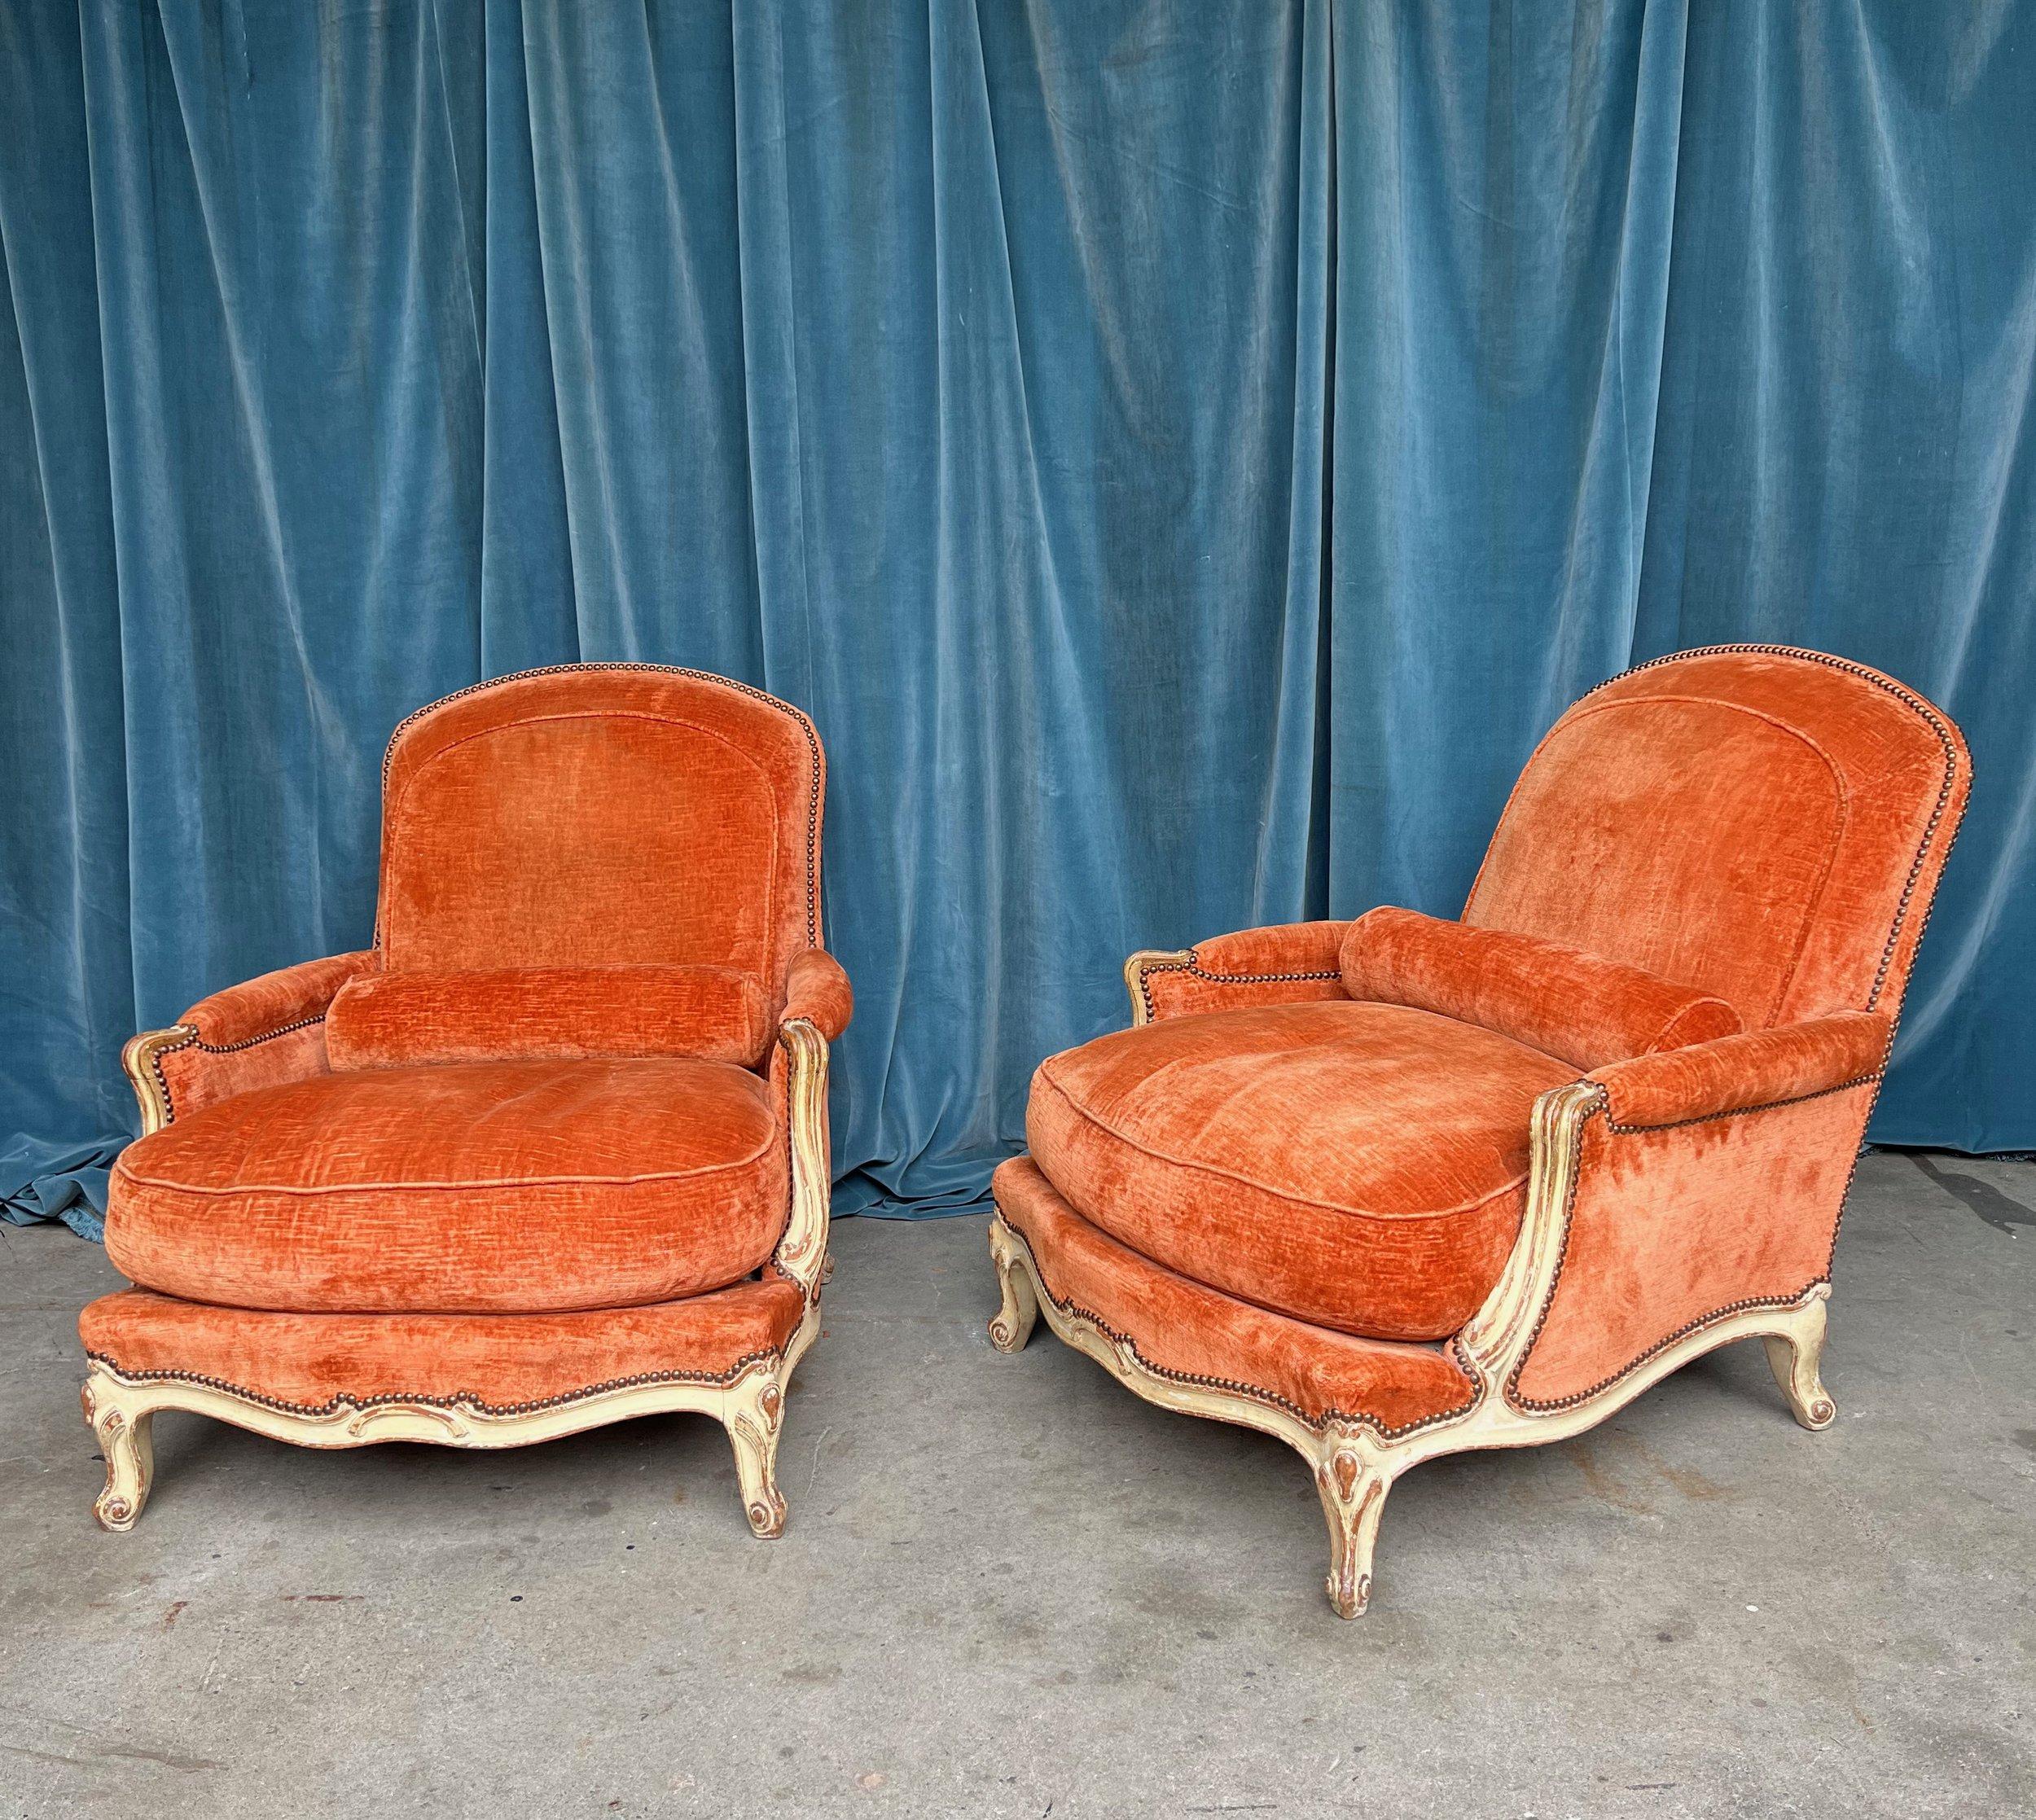 A large pair of French 19th century armchairs upholstered in crushed orange velvet with cabriole legs in the Louis XV style. Immerse yourself in the opulence of French design with this exquisite pair of large scale vintage armchairs, embodying the